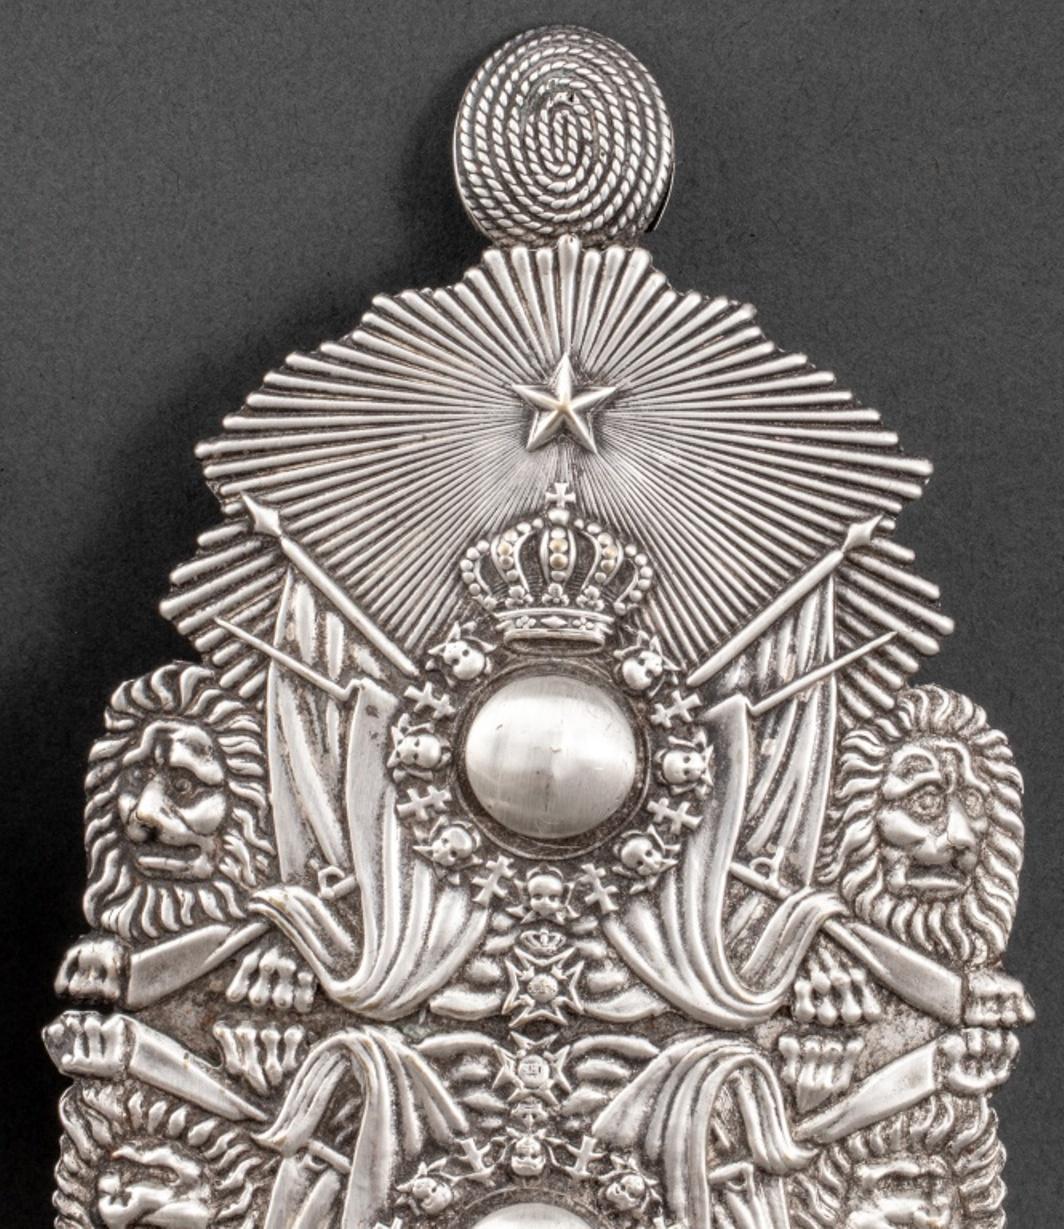 Pair of Swedish silver plated one light reflector sconces, made from Swedish Royal Guards' helmet mounts and depicting the royal crown and collar of the Swedish Order of the Seraphim.

Dimensions: 11